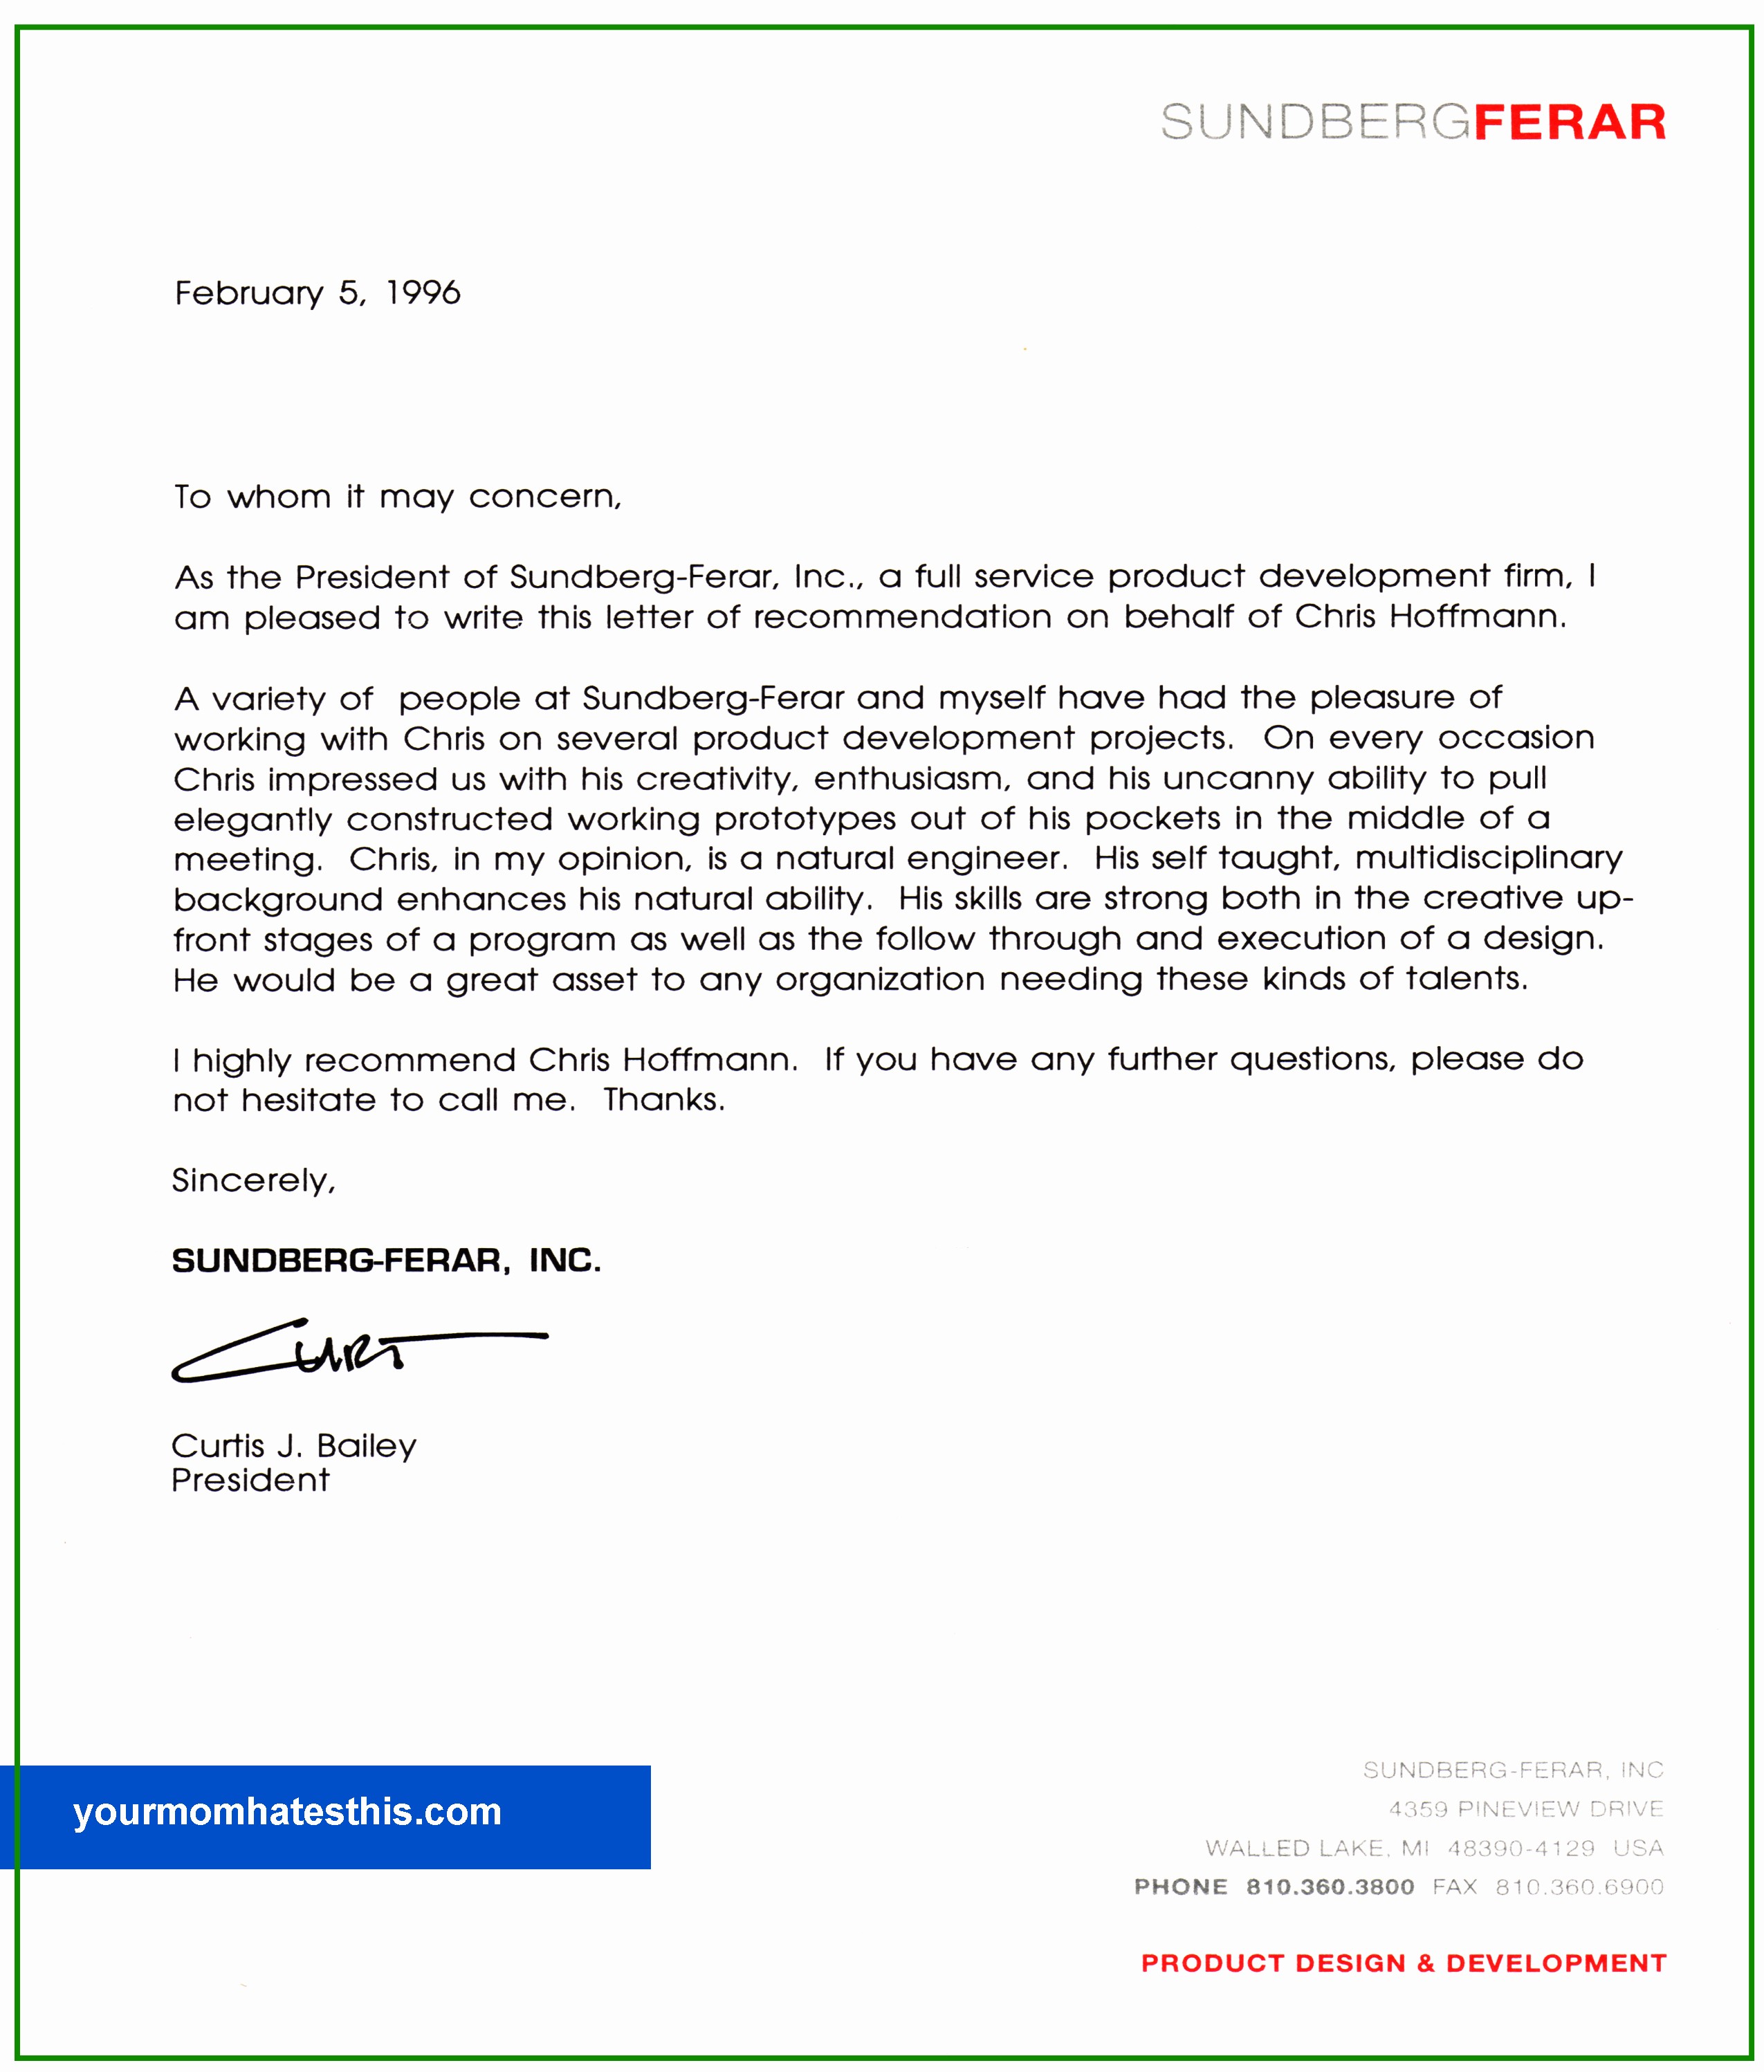 Letter Of Recommendation Template Student Lovely Writing A Letter Of Re Mendation for A Student for College